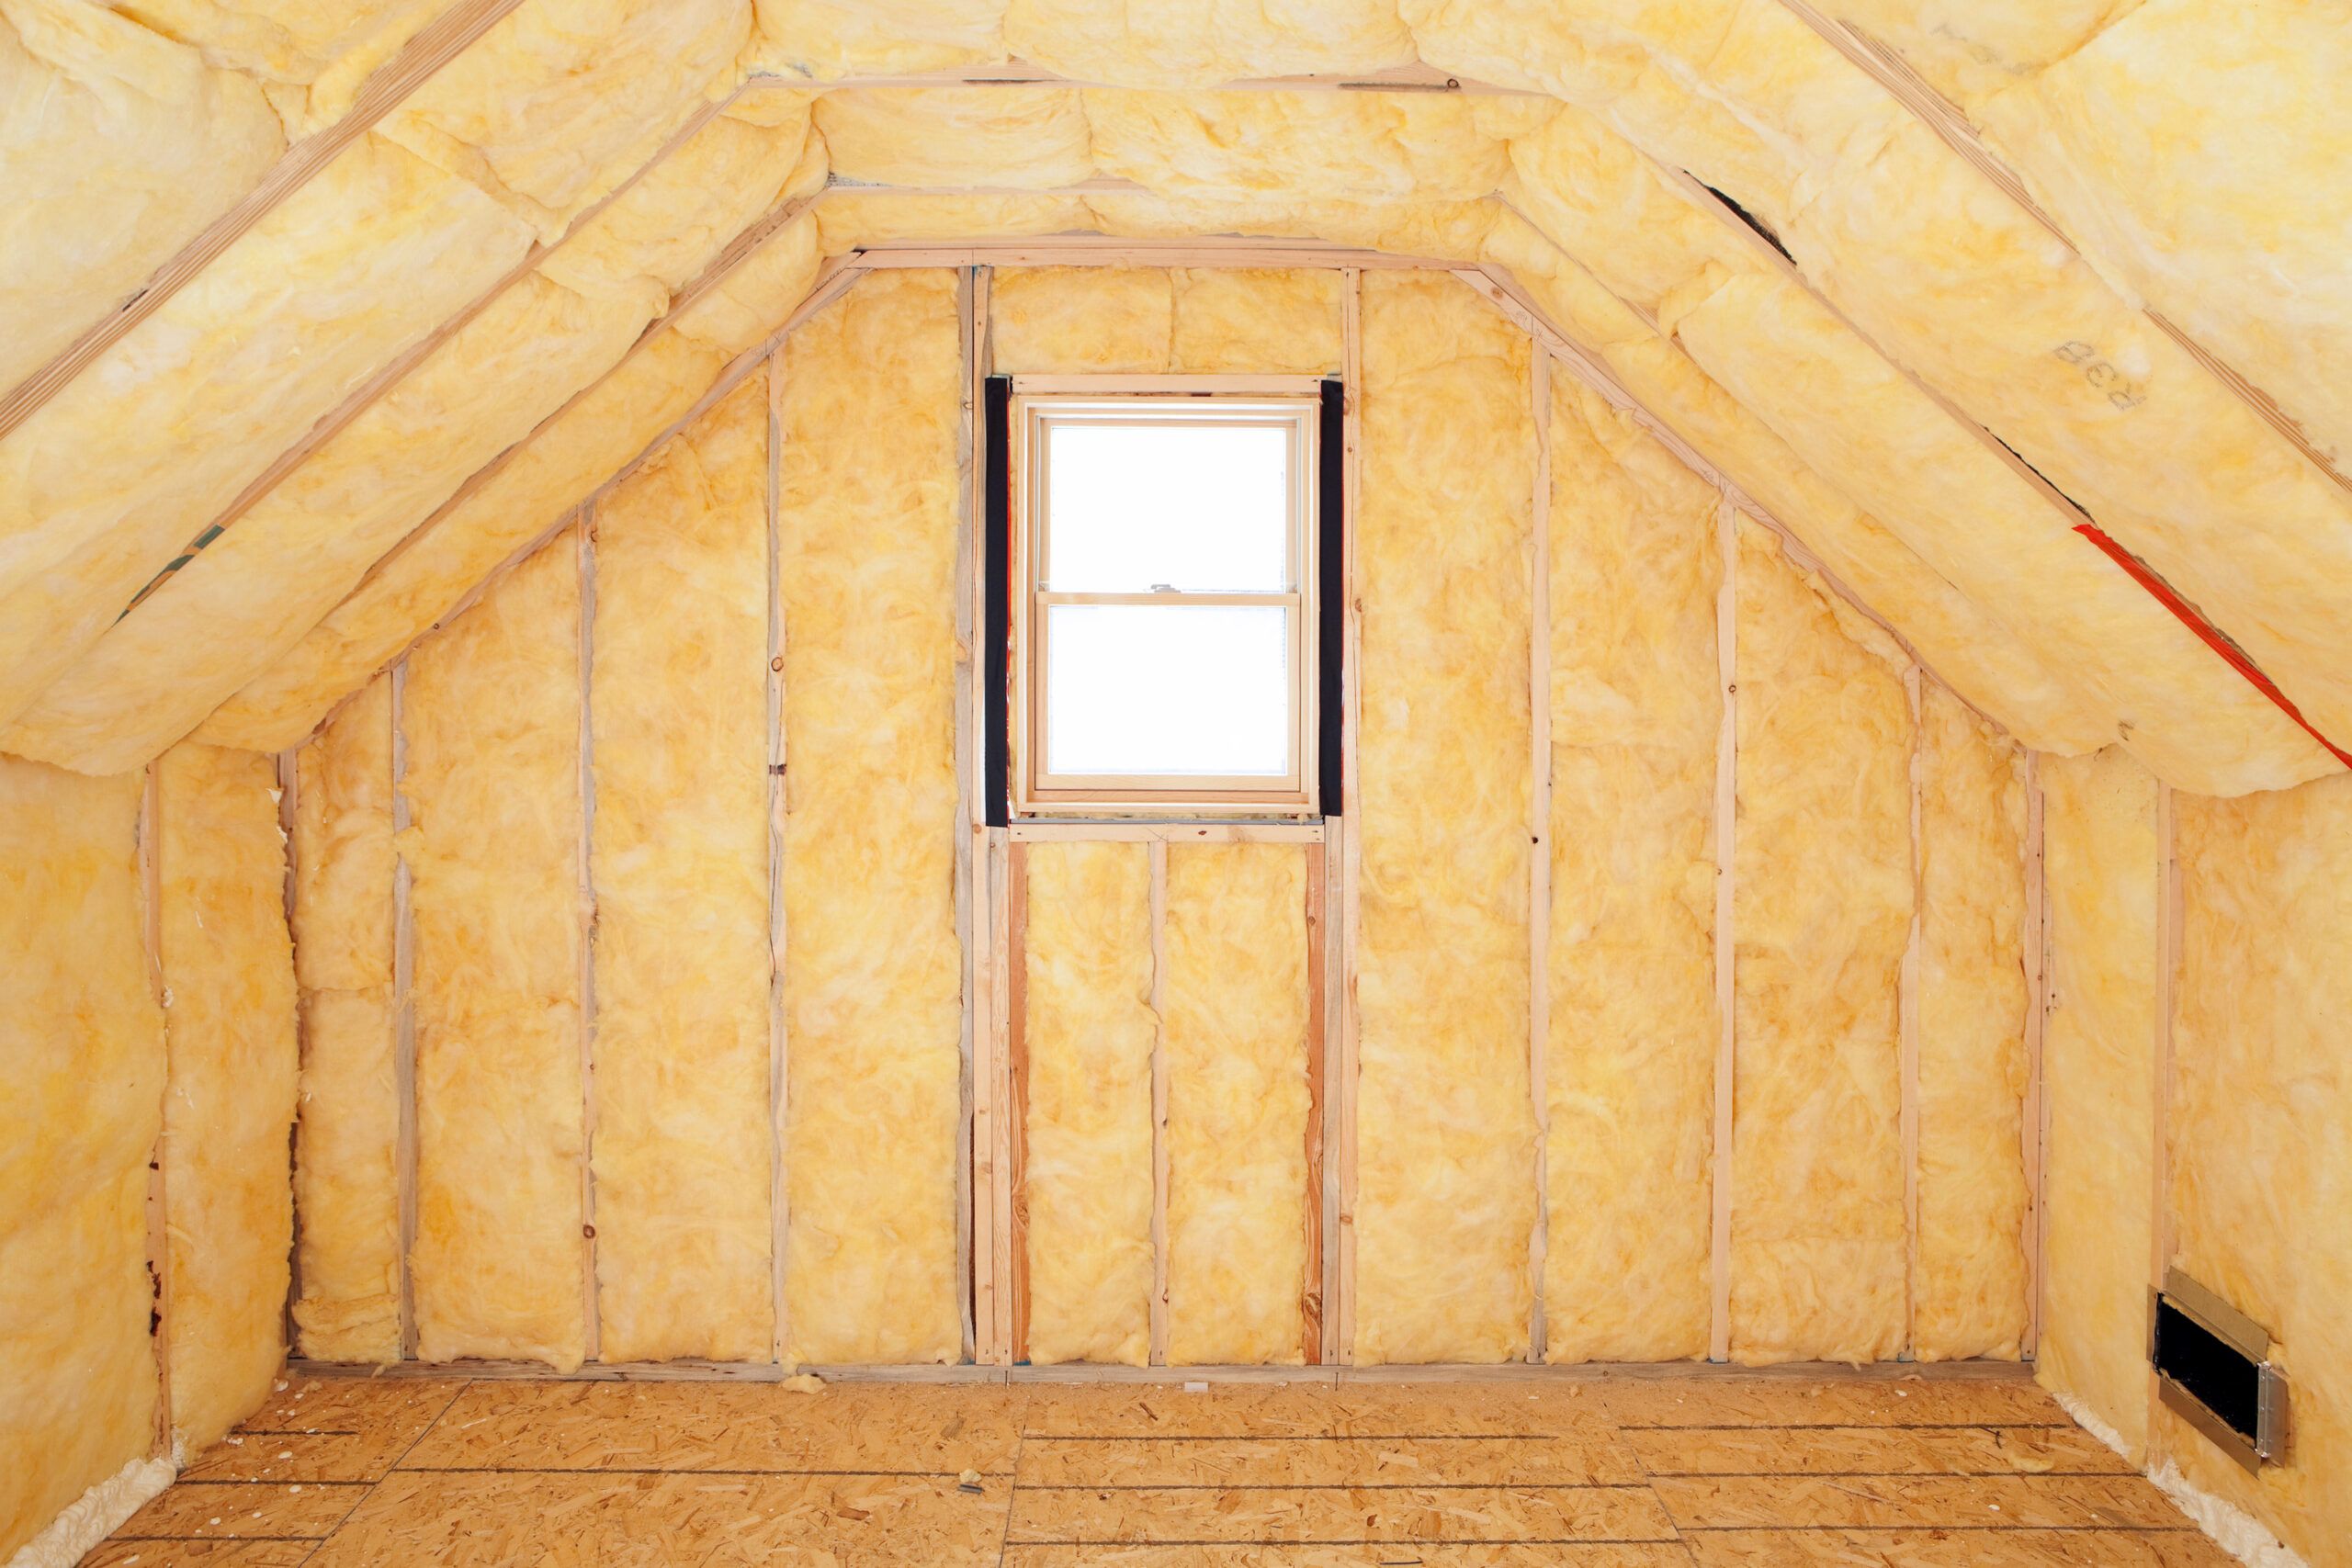 About Insulation